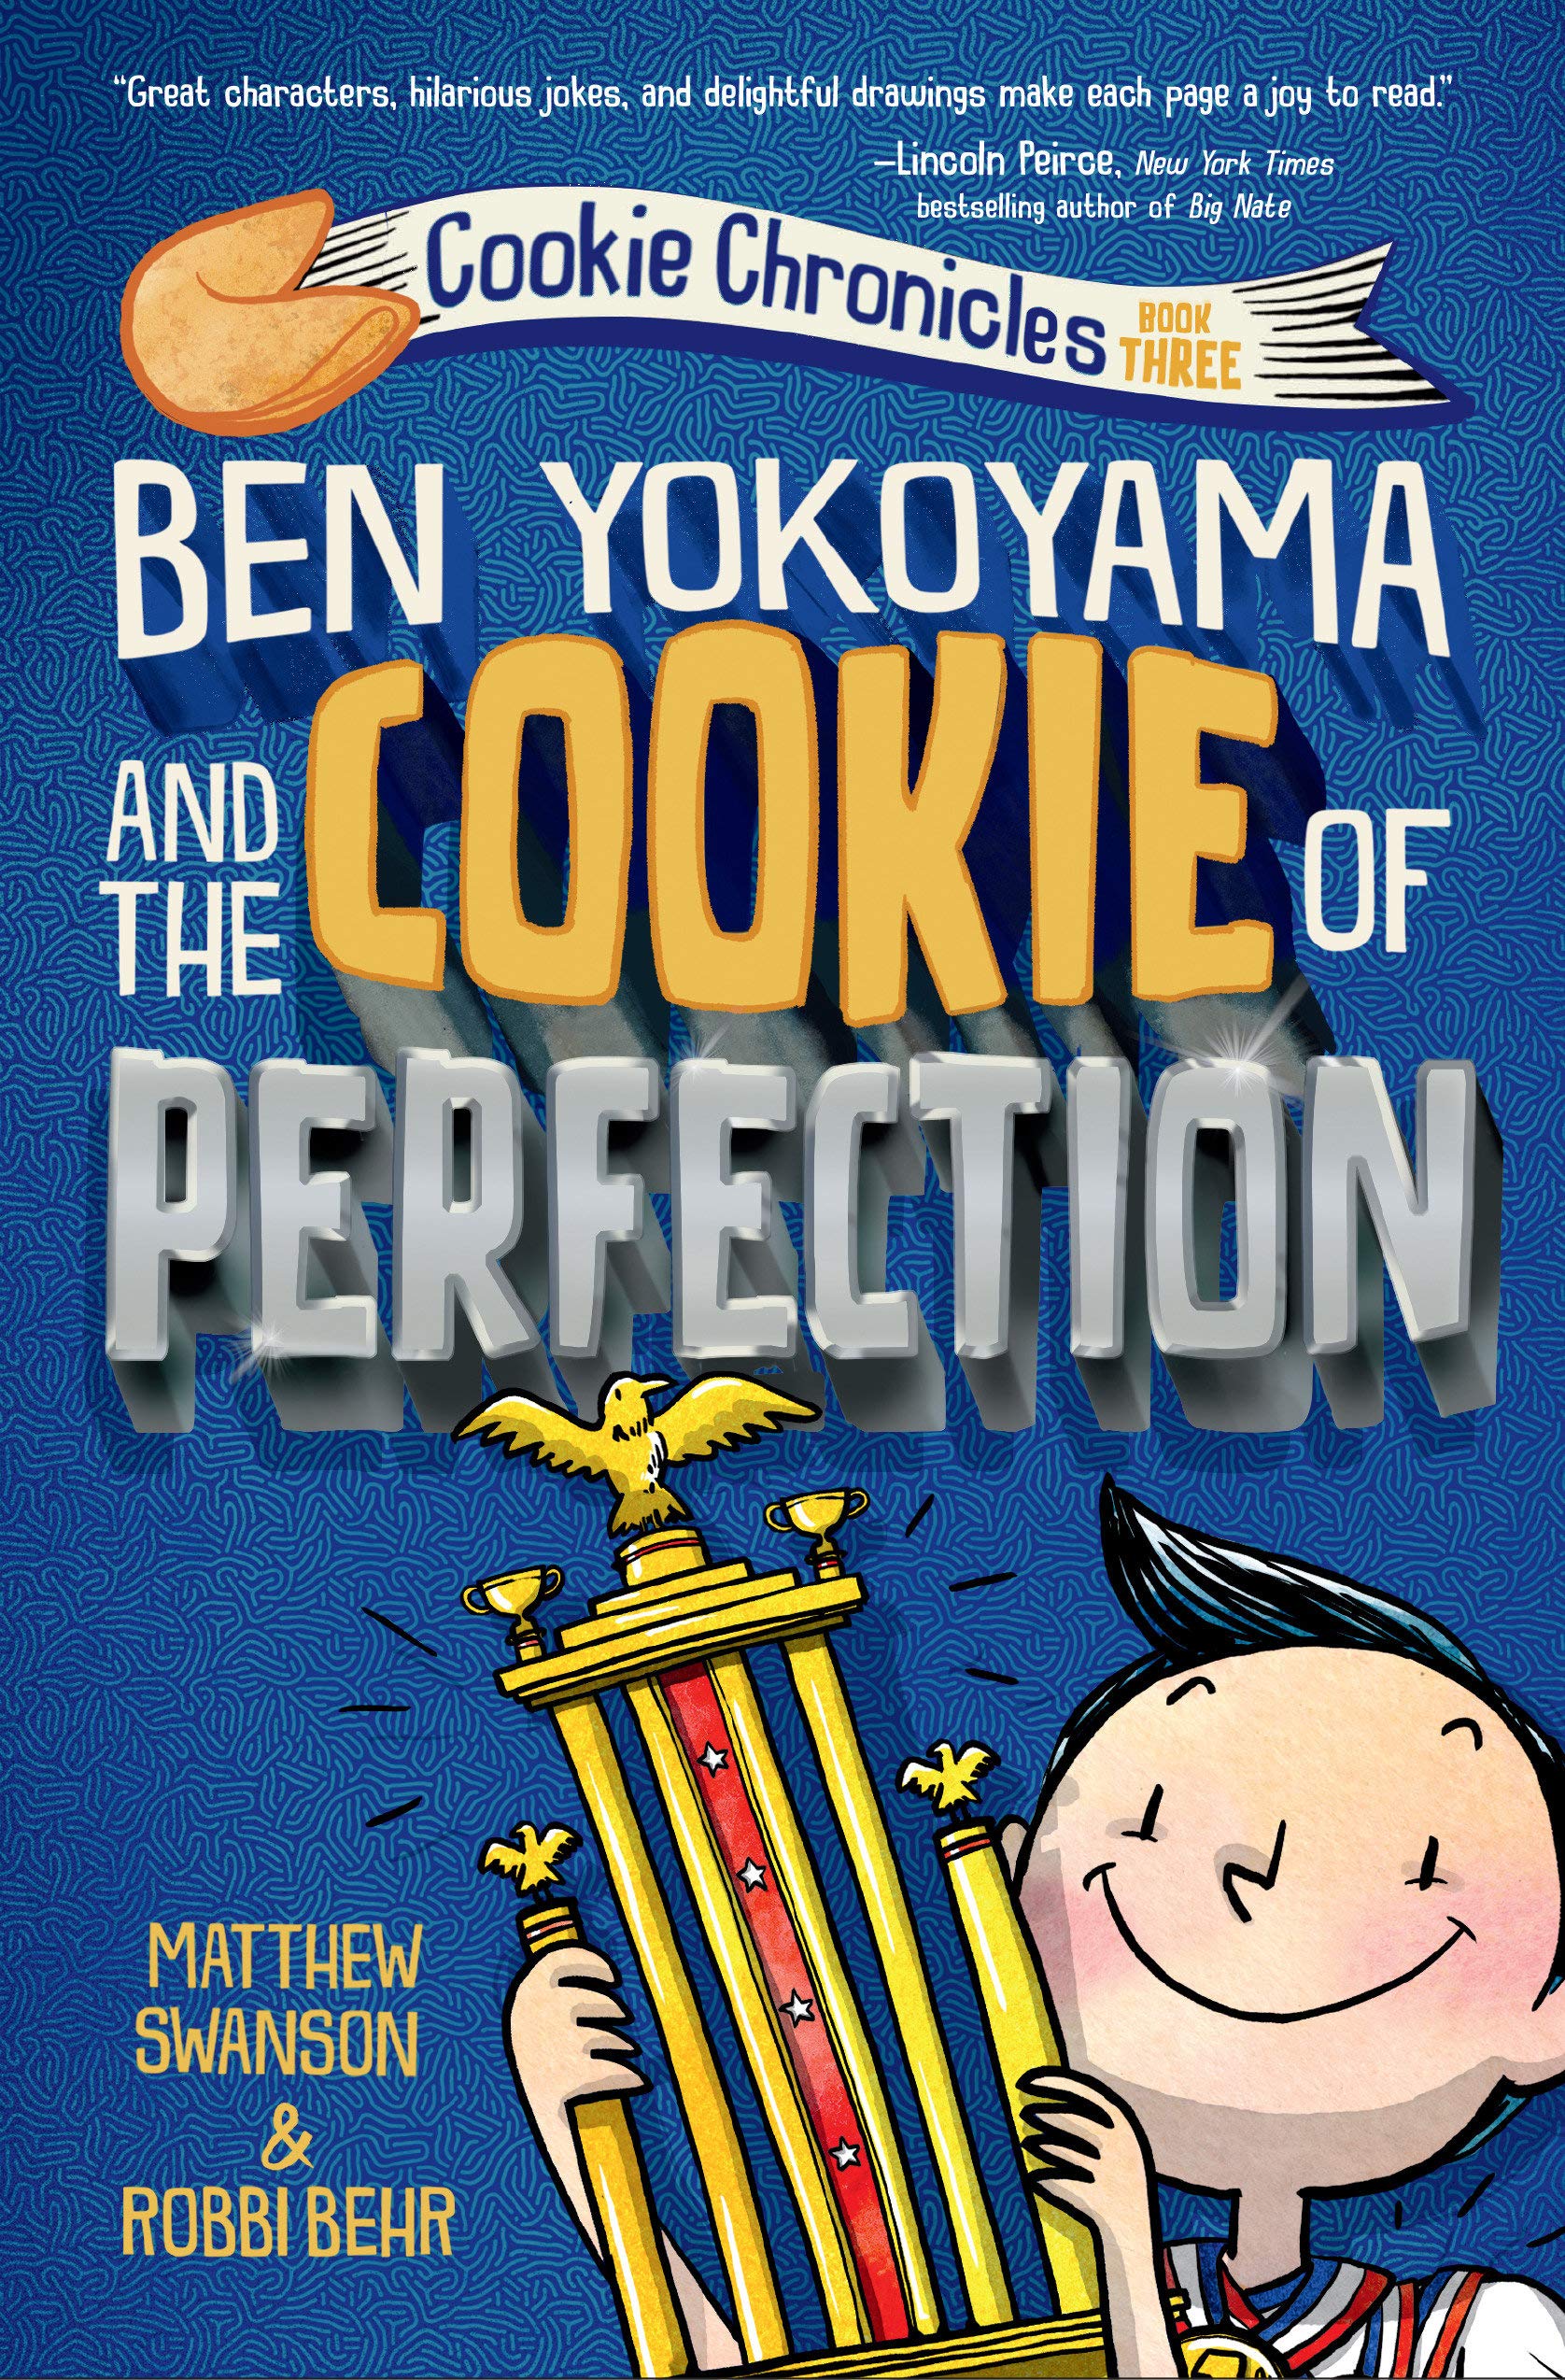 The cover of the book, "Ben Yokoyama and the Cookie of Perfection" by Matthew Swanson & Robbi Behr, showing a kid holding a trophy against a blue background.